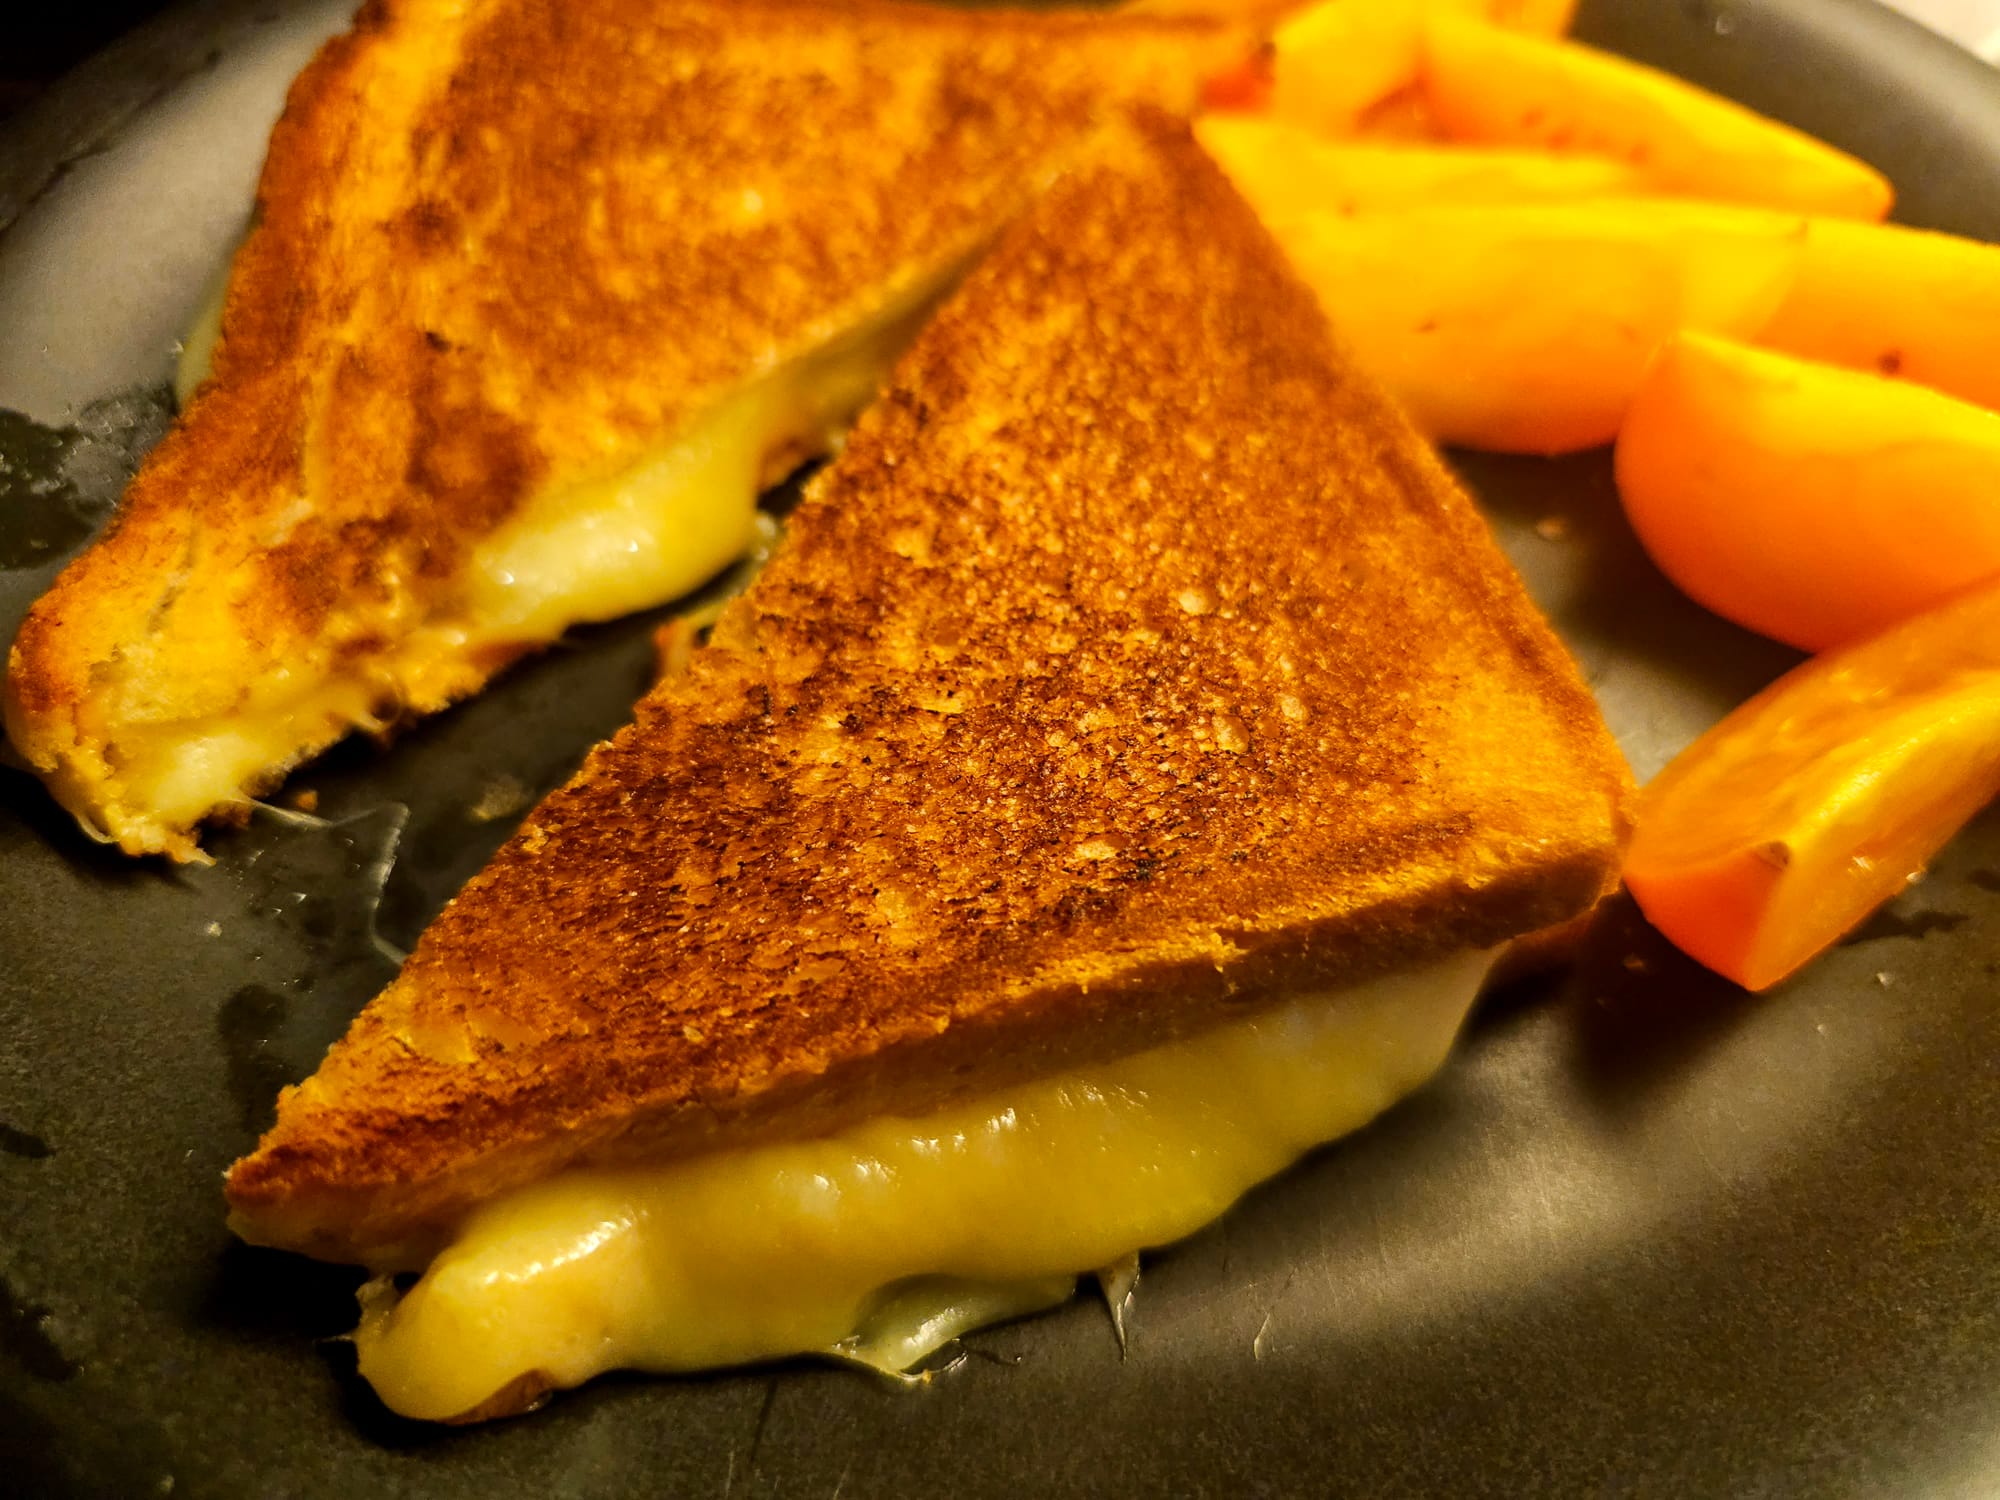 A grilled cheese sandwich, cut in two triangular pieces, cheese oozing out at the sides. Behind it a cut up yellow tomato. 